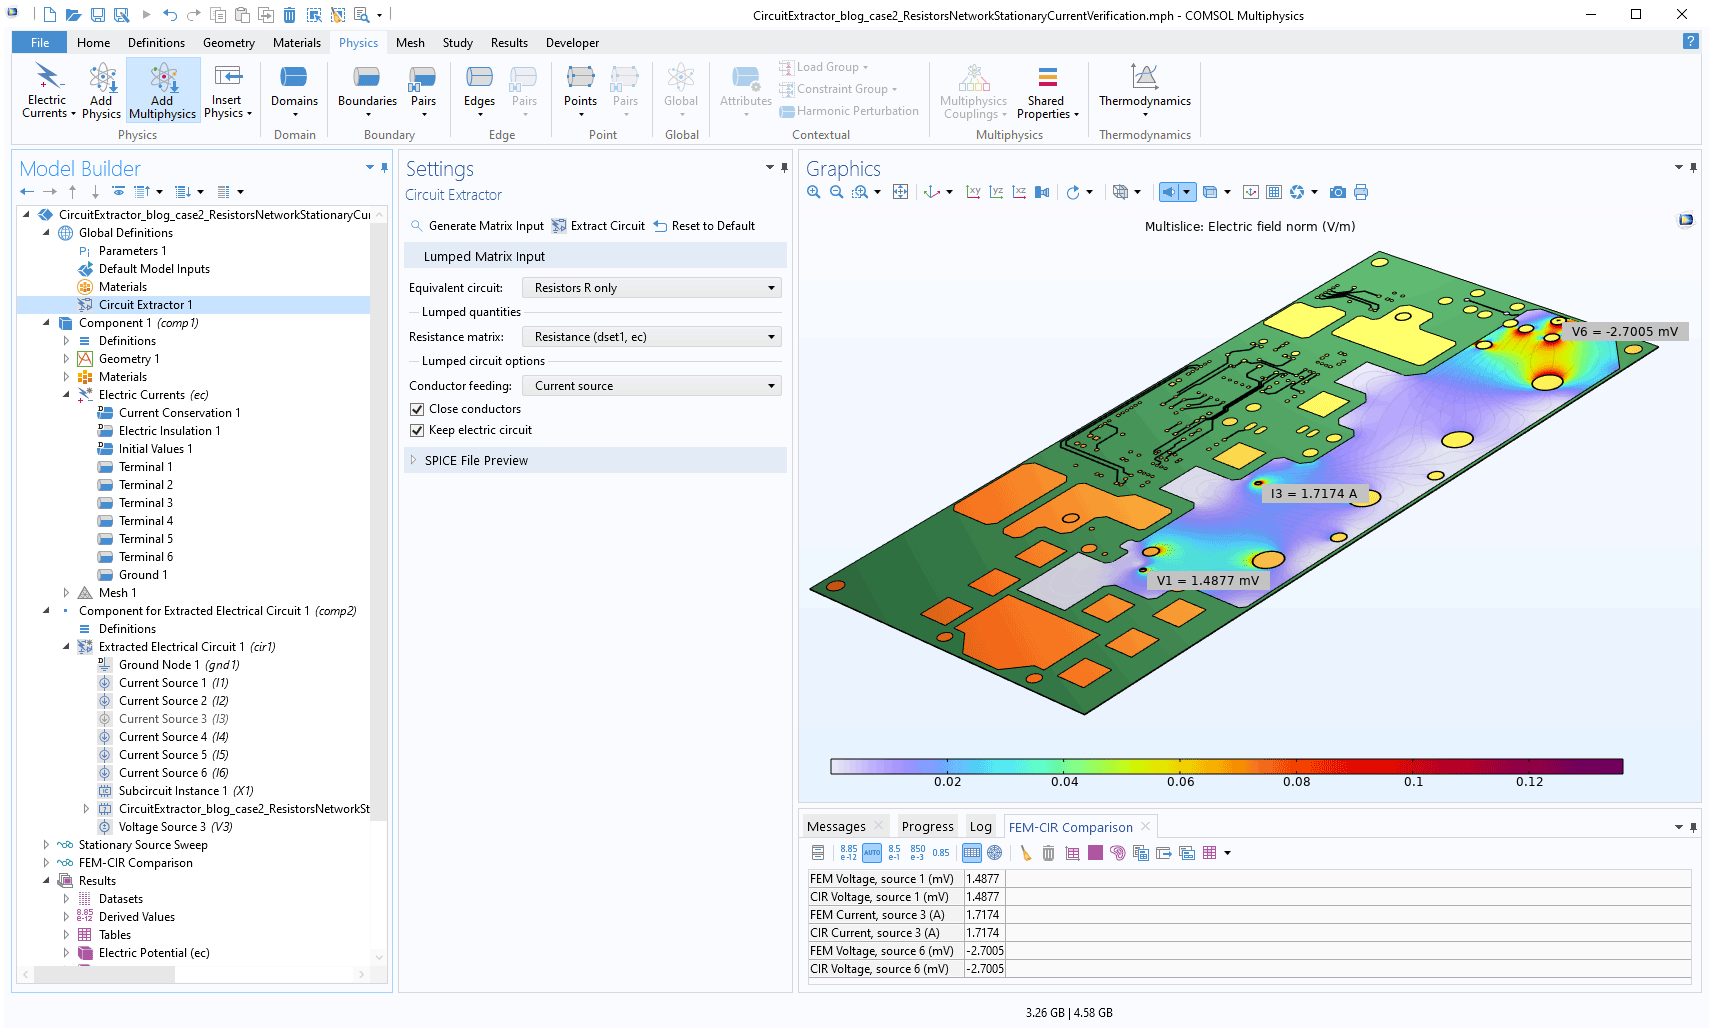 The COMSOL Multiphysics UI showing the Model Builder with the Circuit Extractor node highlighted, the corresponding Settings window, and a PCB model in the Graphics window.